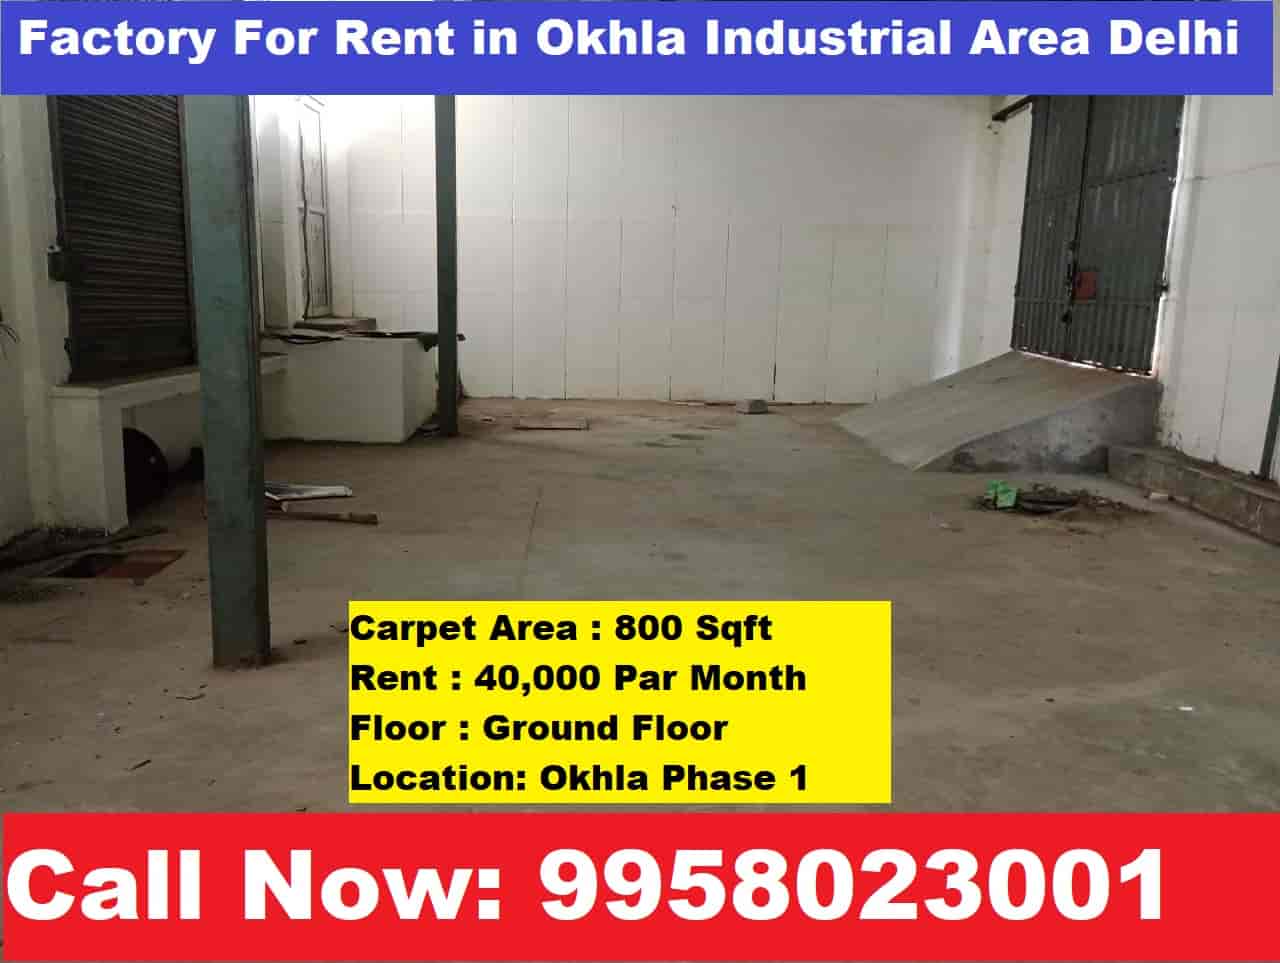 Factory For Rent in Okhla Industrial Area Delhi